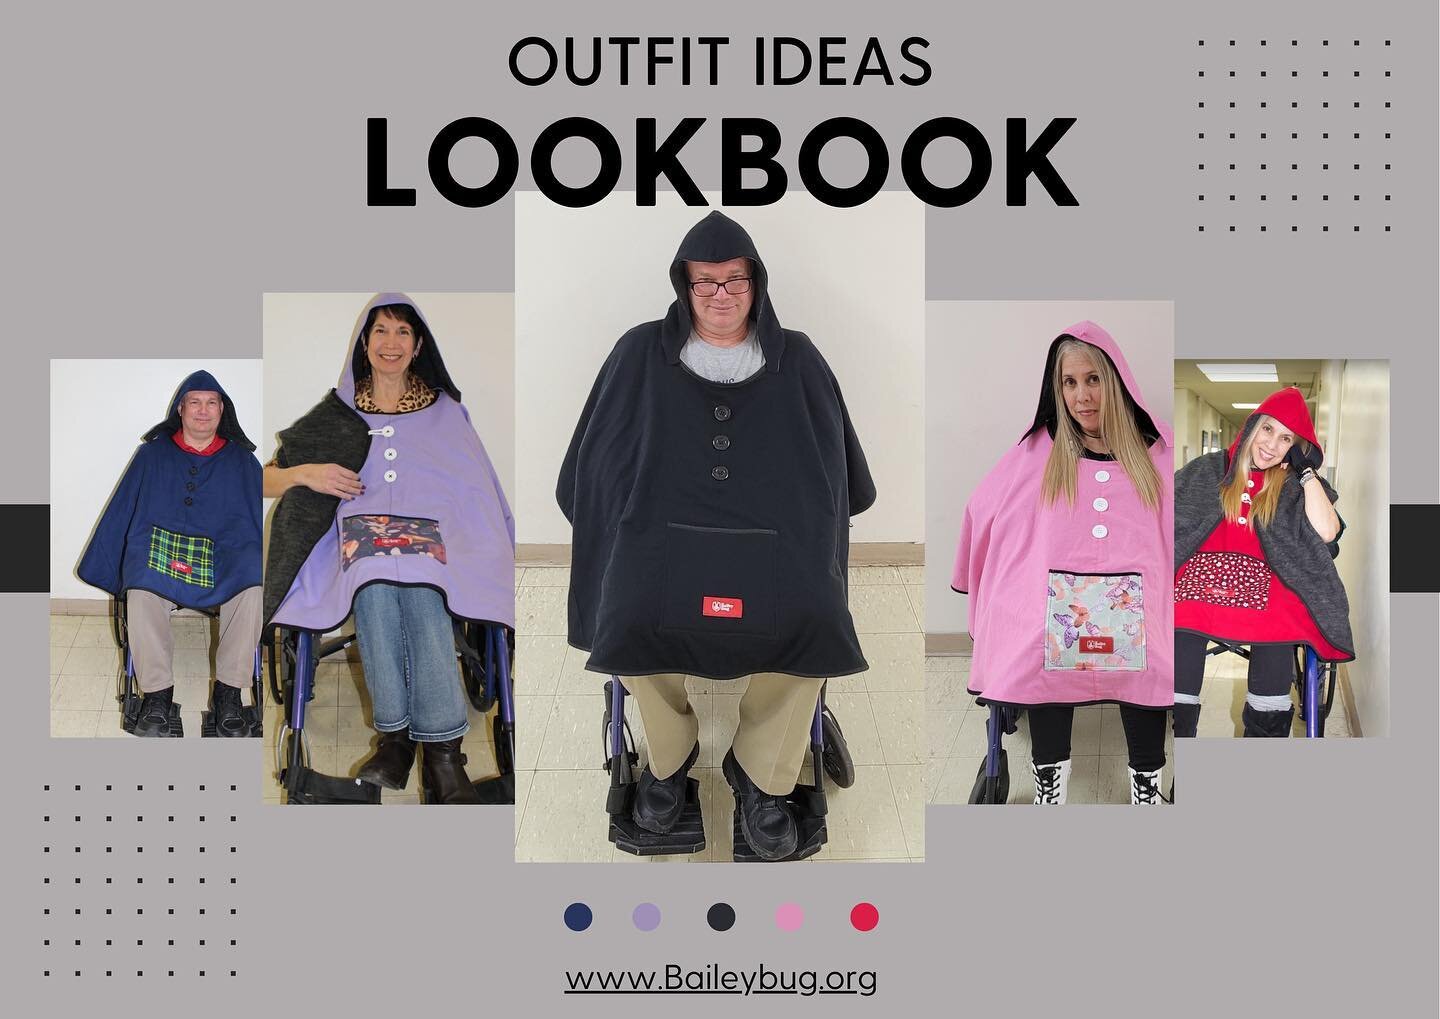 Calling all wheelchair users! Which fabric option speaks to your style? Our Wheelchair Coat comes in a range of colors and designs so you can choose the perfect fit for you. Hand-sewn by those with disabilities, using locally sourced fabrics, our coa